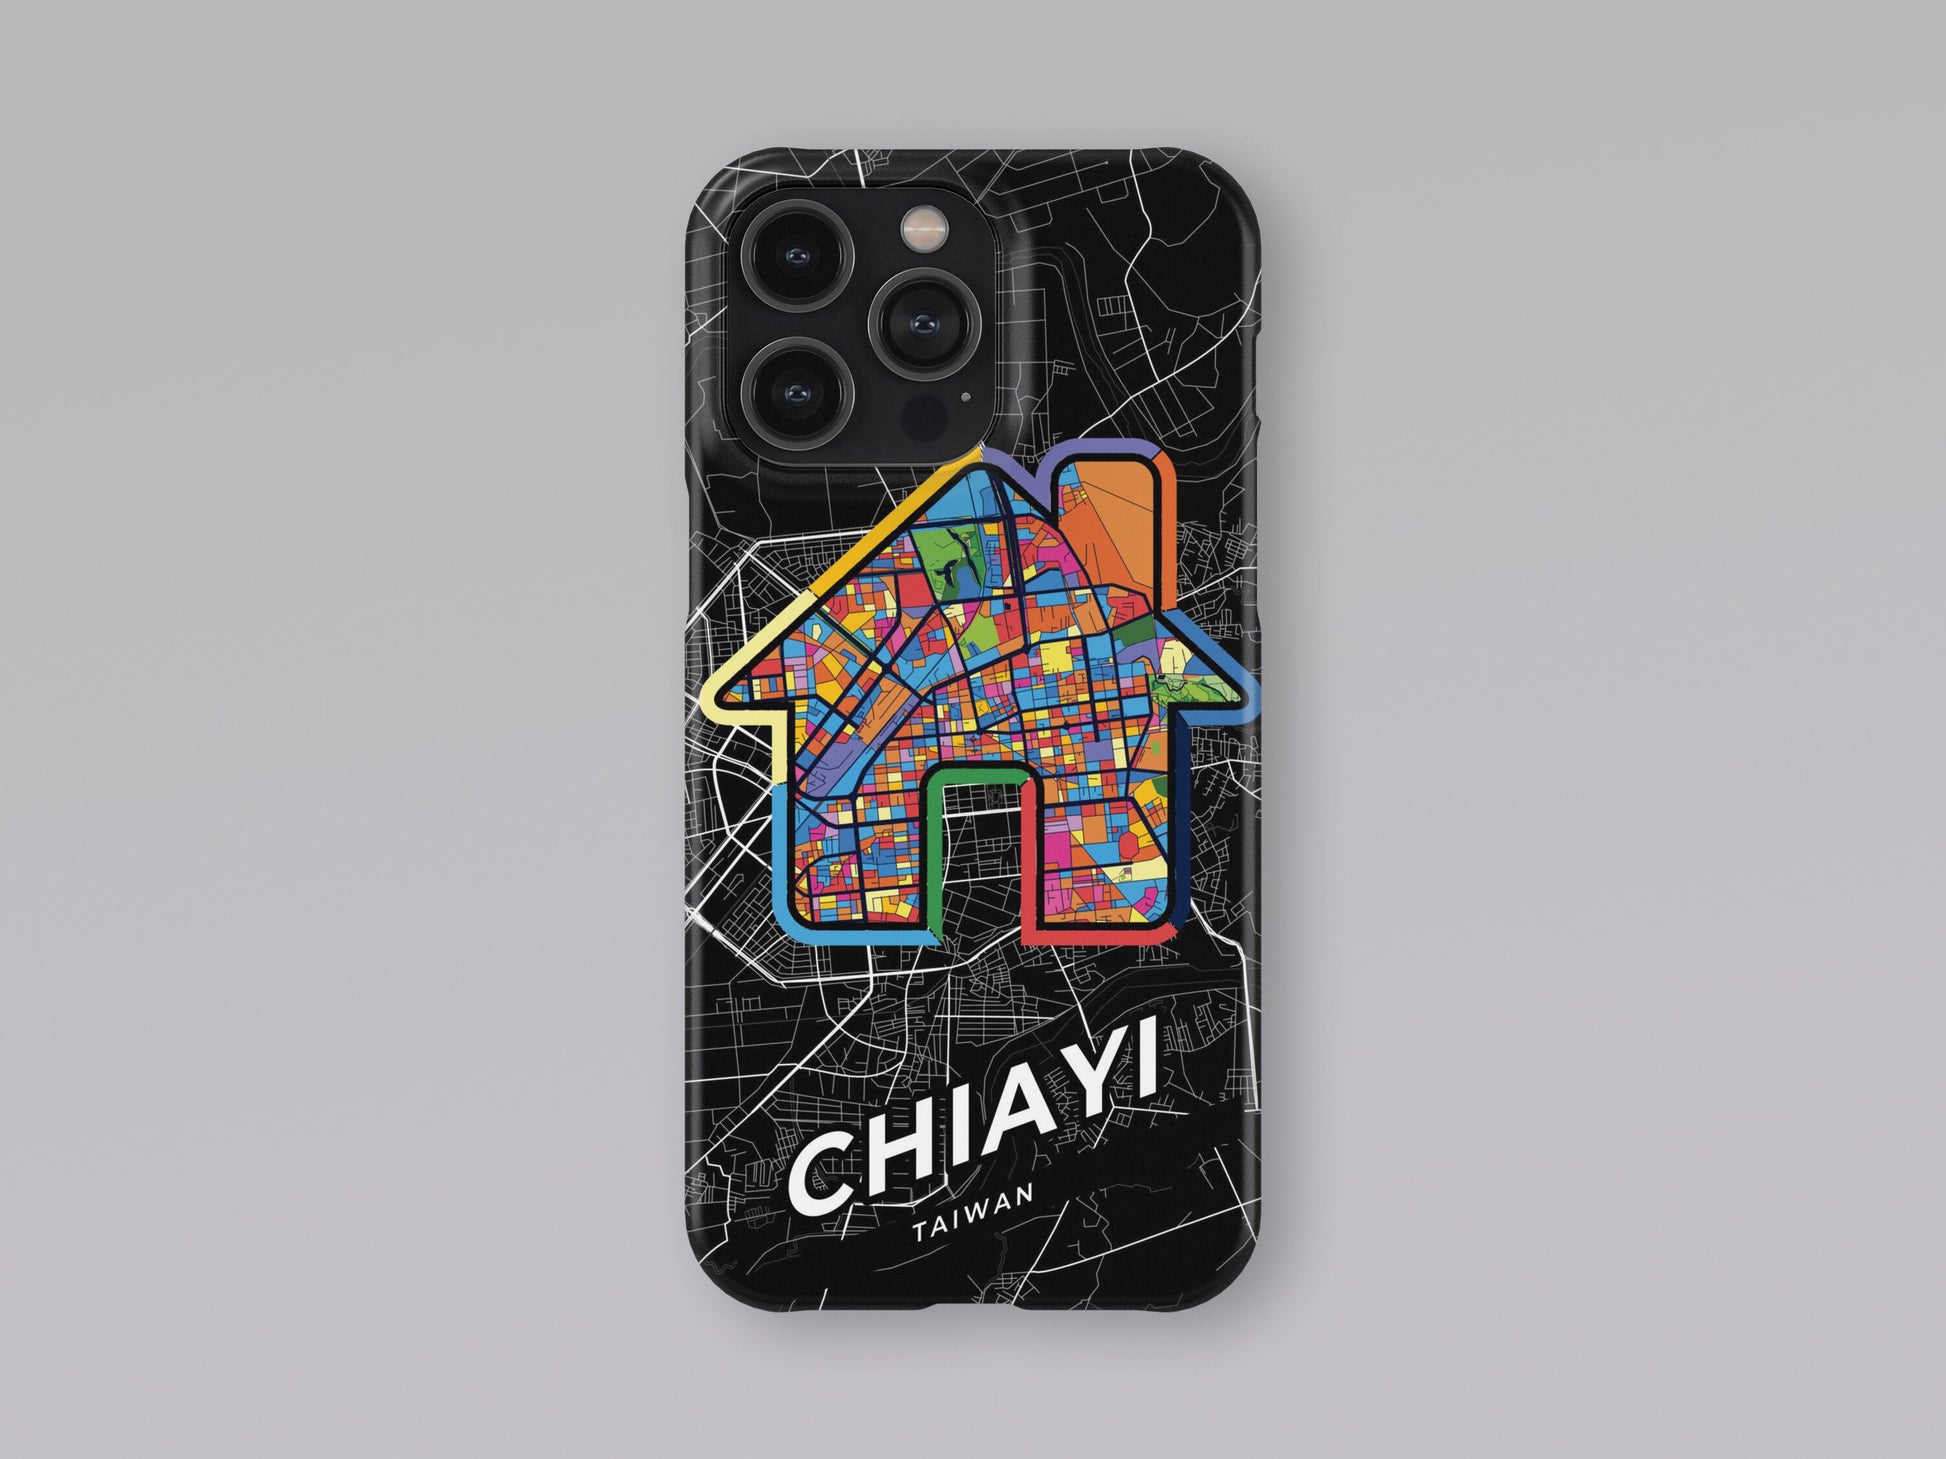 Chiayi Taiwan slim phone case with colorful icon. Birthday, wedding or housewarming gift. Couple match cases. 3